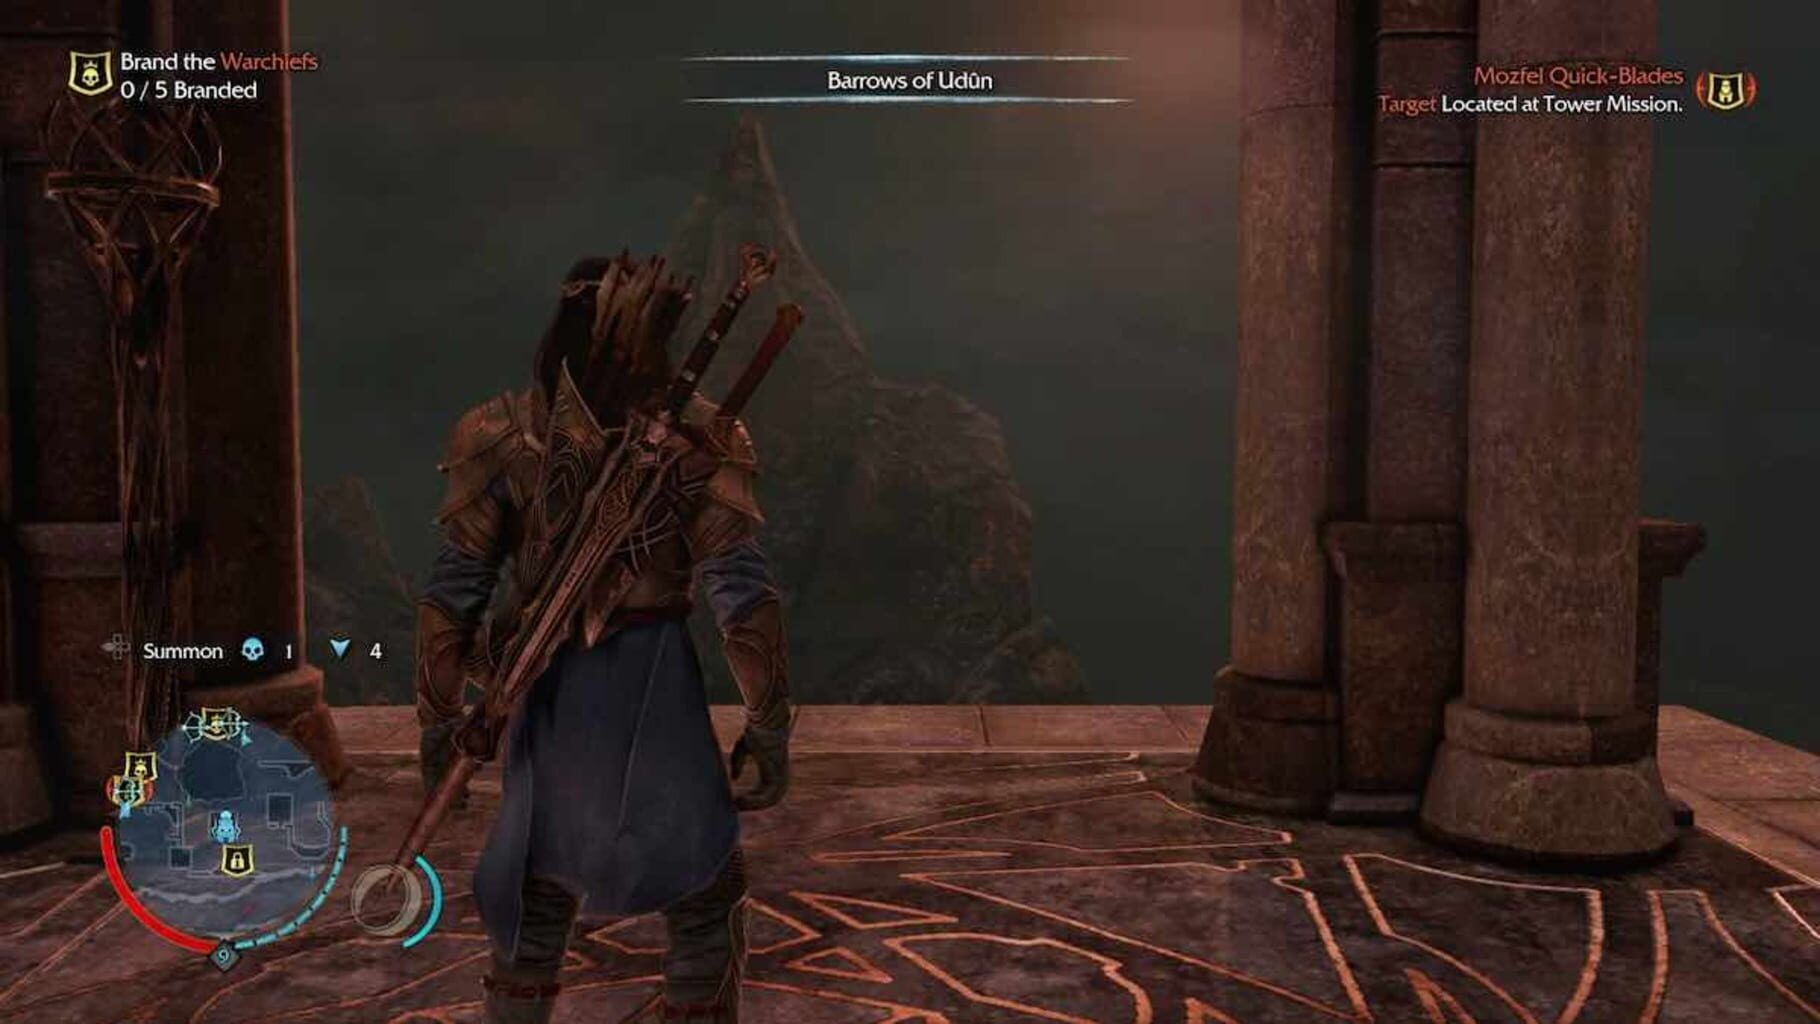 Middle-earth: Shadow of Mordor - The Bright Lord Image